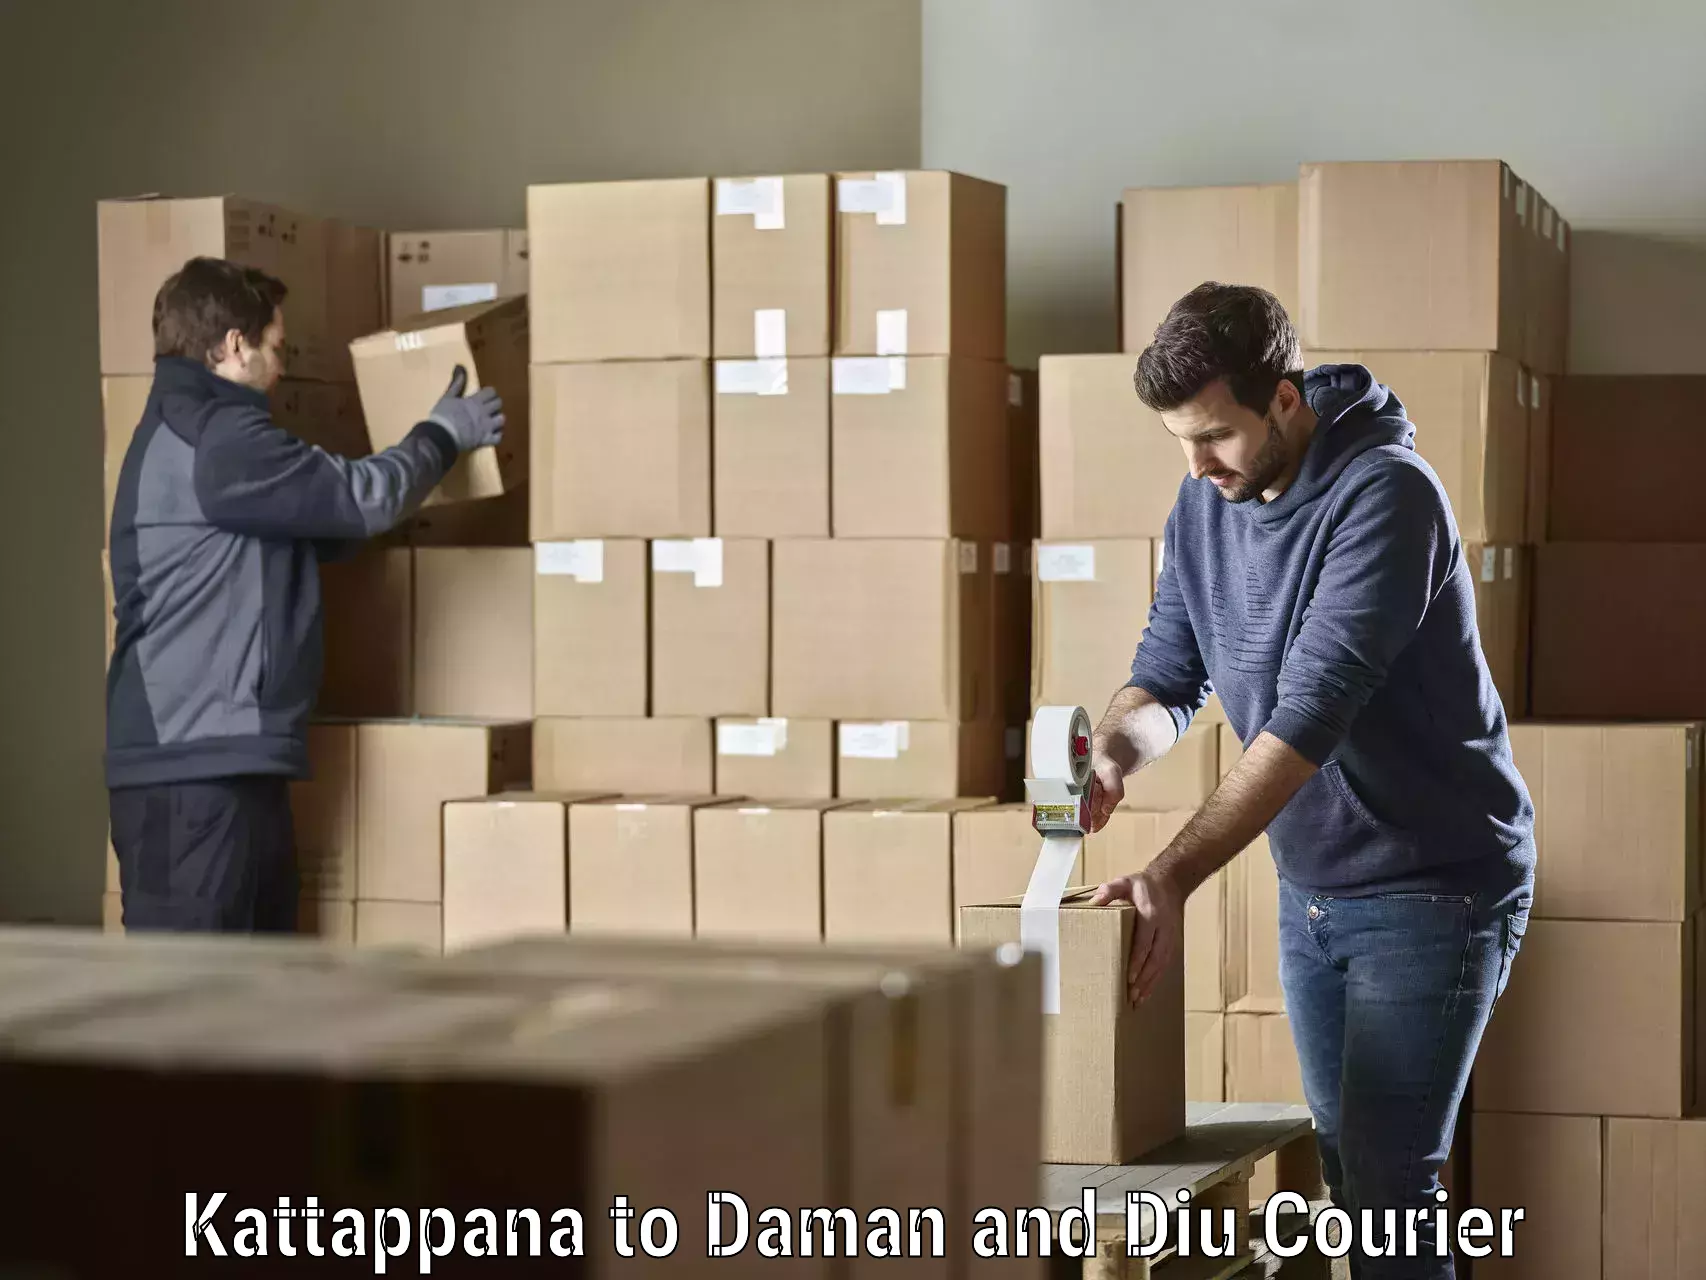 Local delivery service Kattappana to Daman and Diu